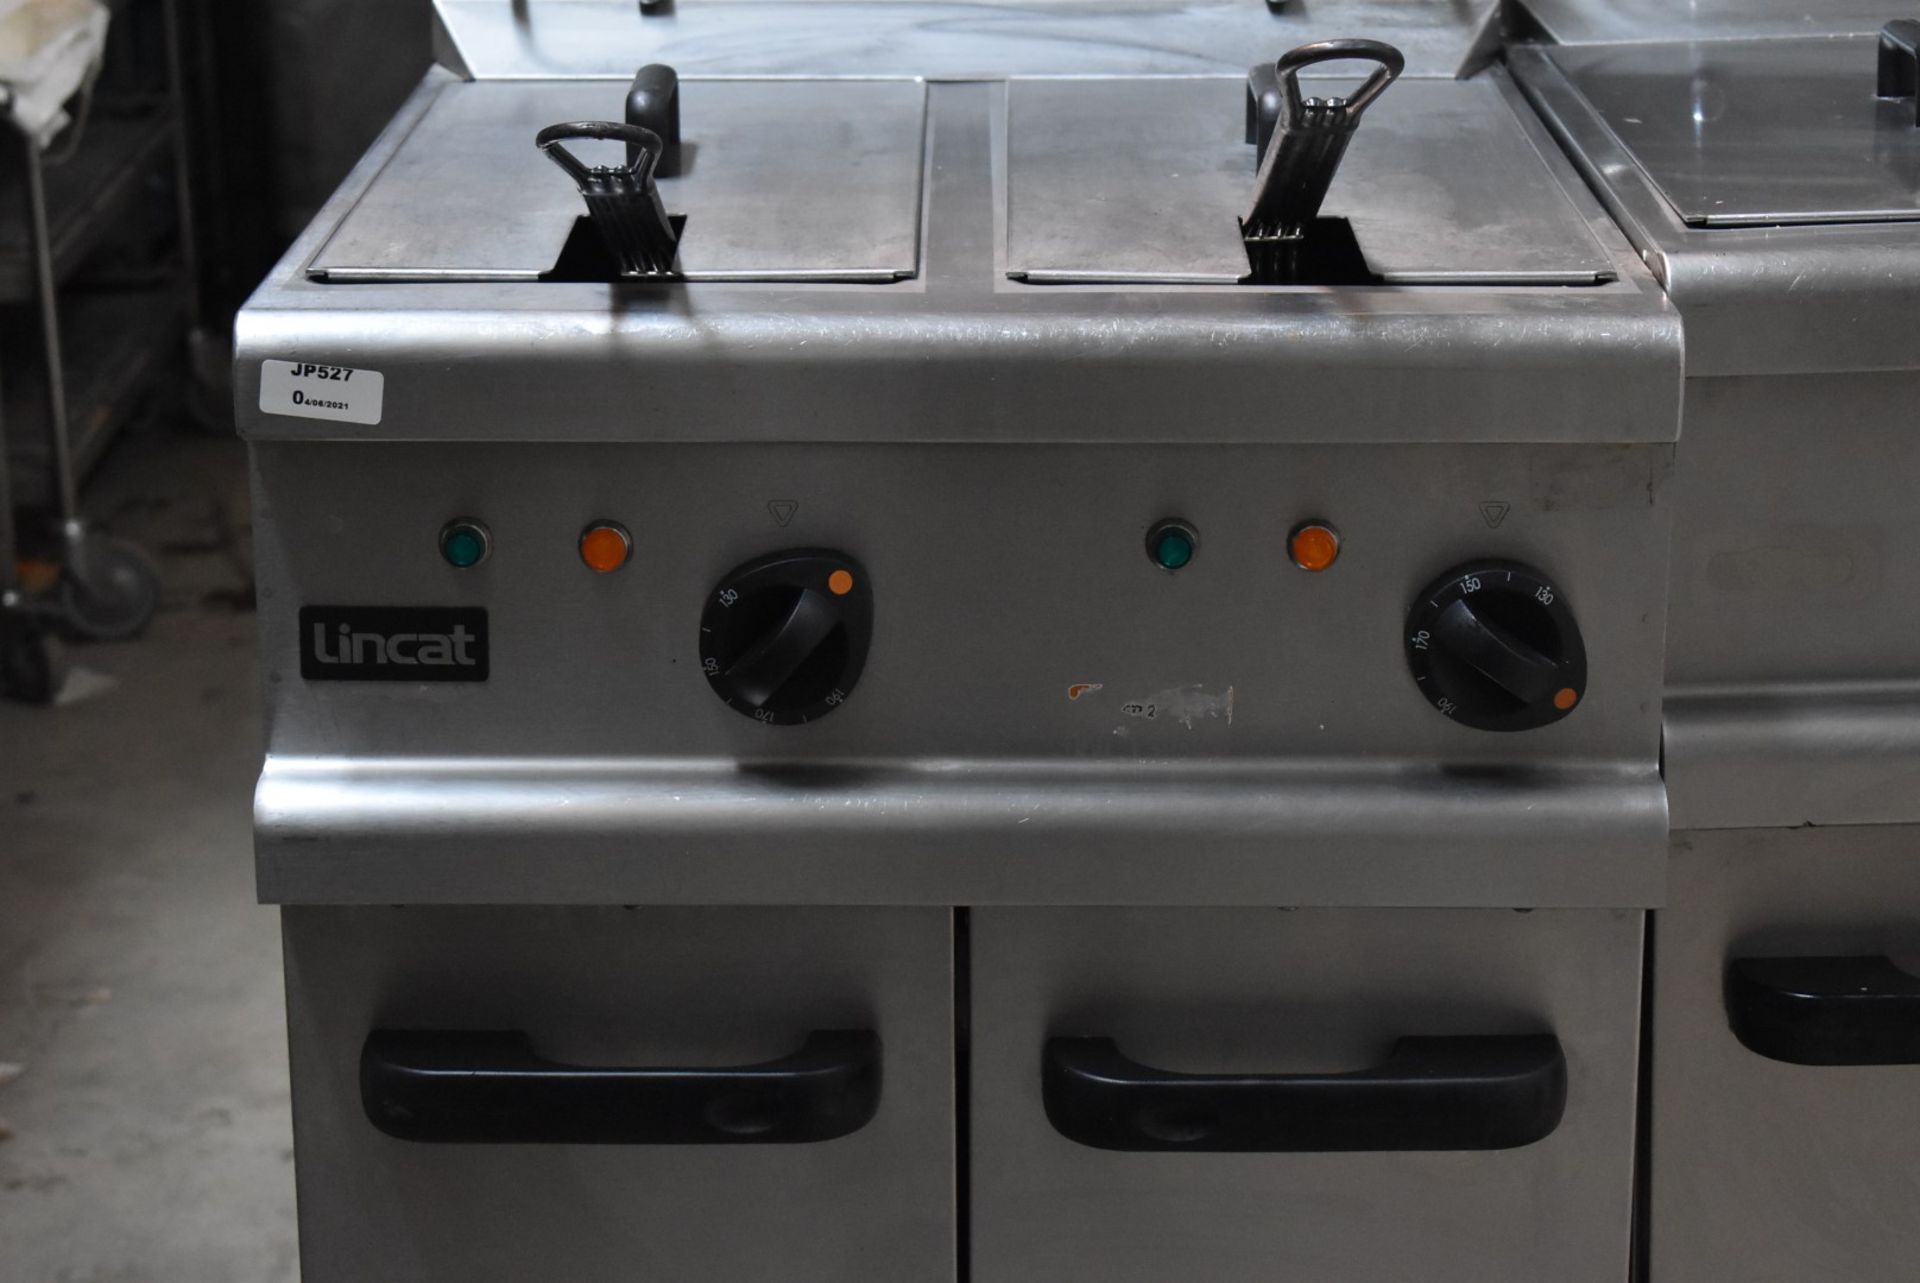 1 x Lincat Opus 700 OE7113 Single Large Tank Electric Fryer With Built In Filteration - 240V / 3PH P - Image 7 of 14